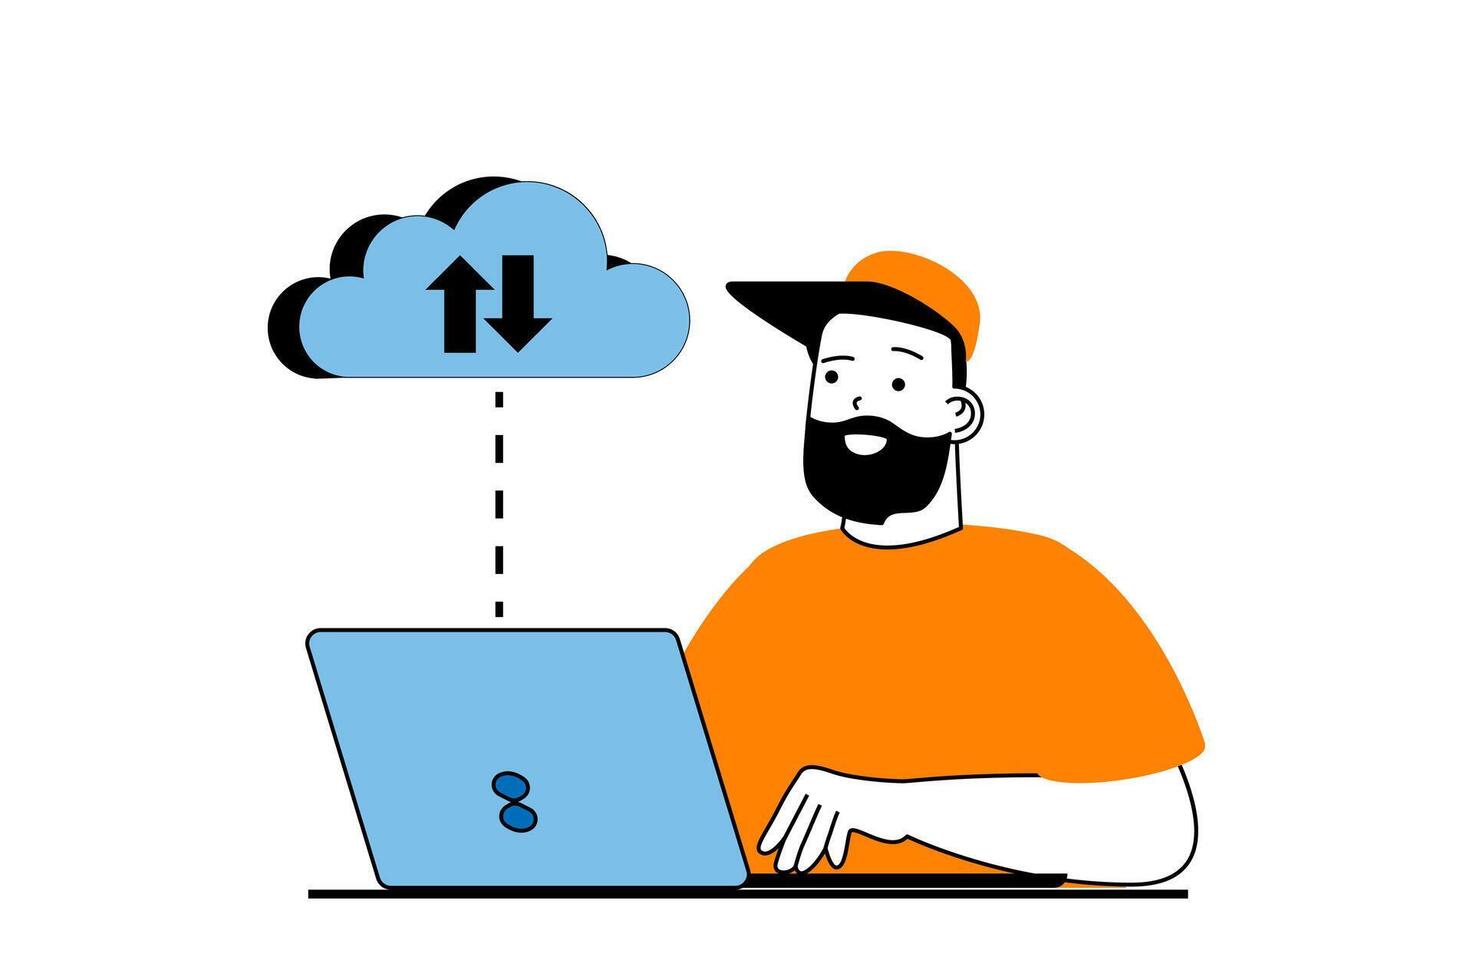 Cloud computing concept with people scene in flat web design. Man sync data in cloud storage, working at laptop with sharing files. Vector illustration for social media banner, marketing material.